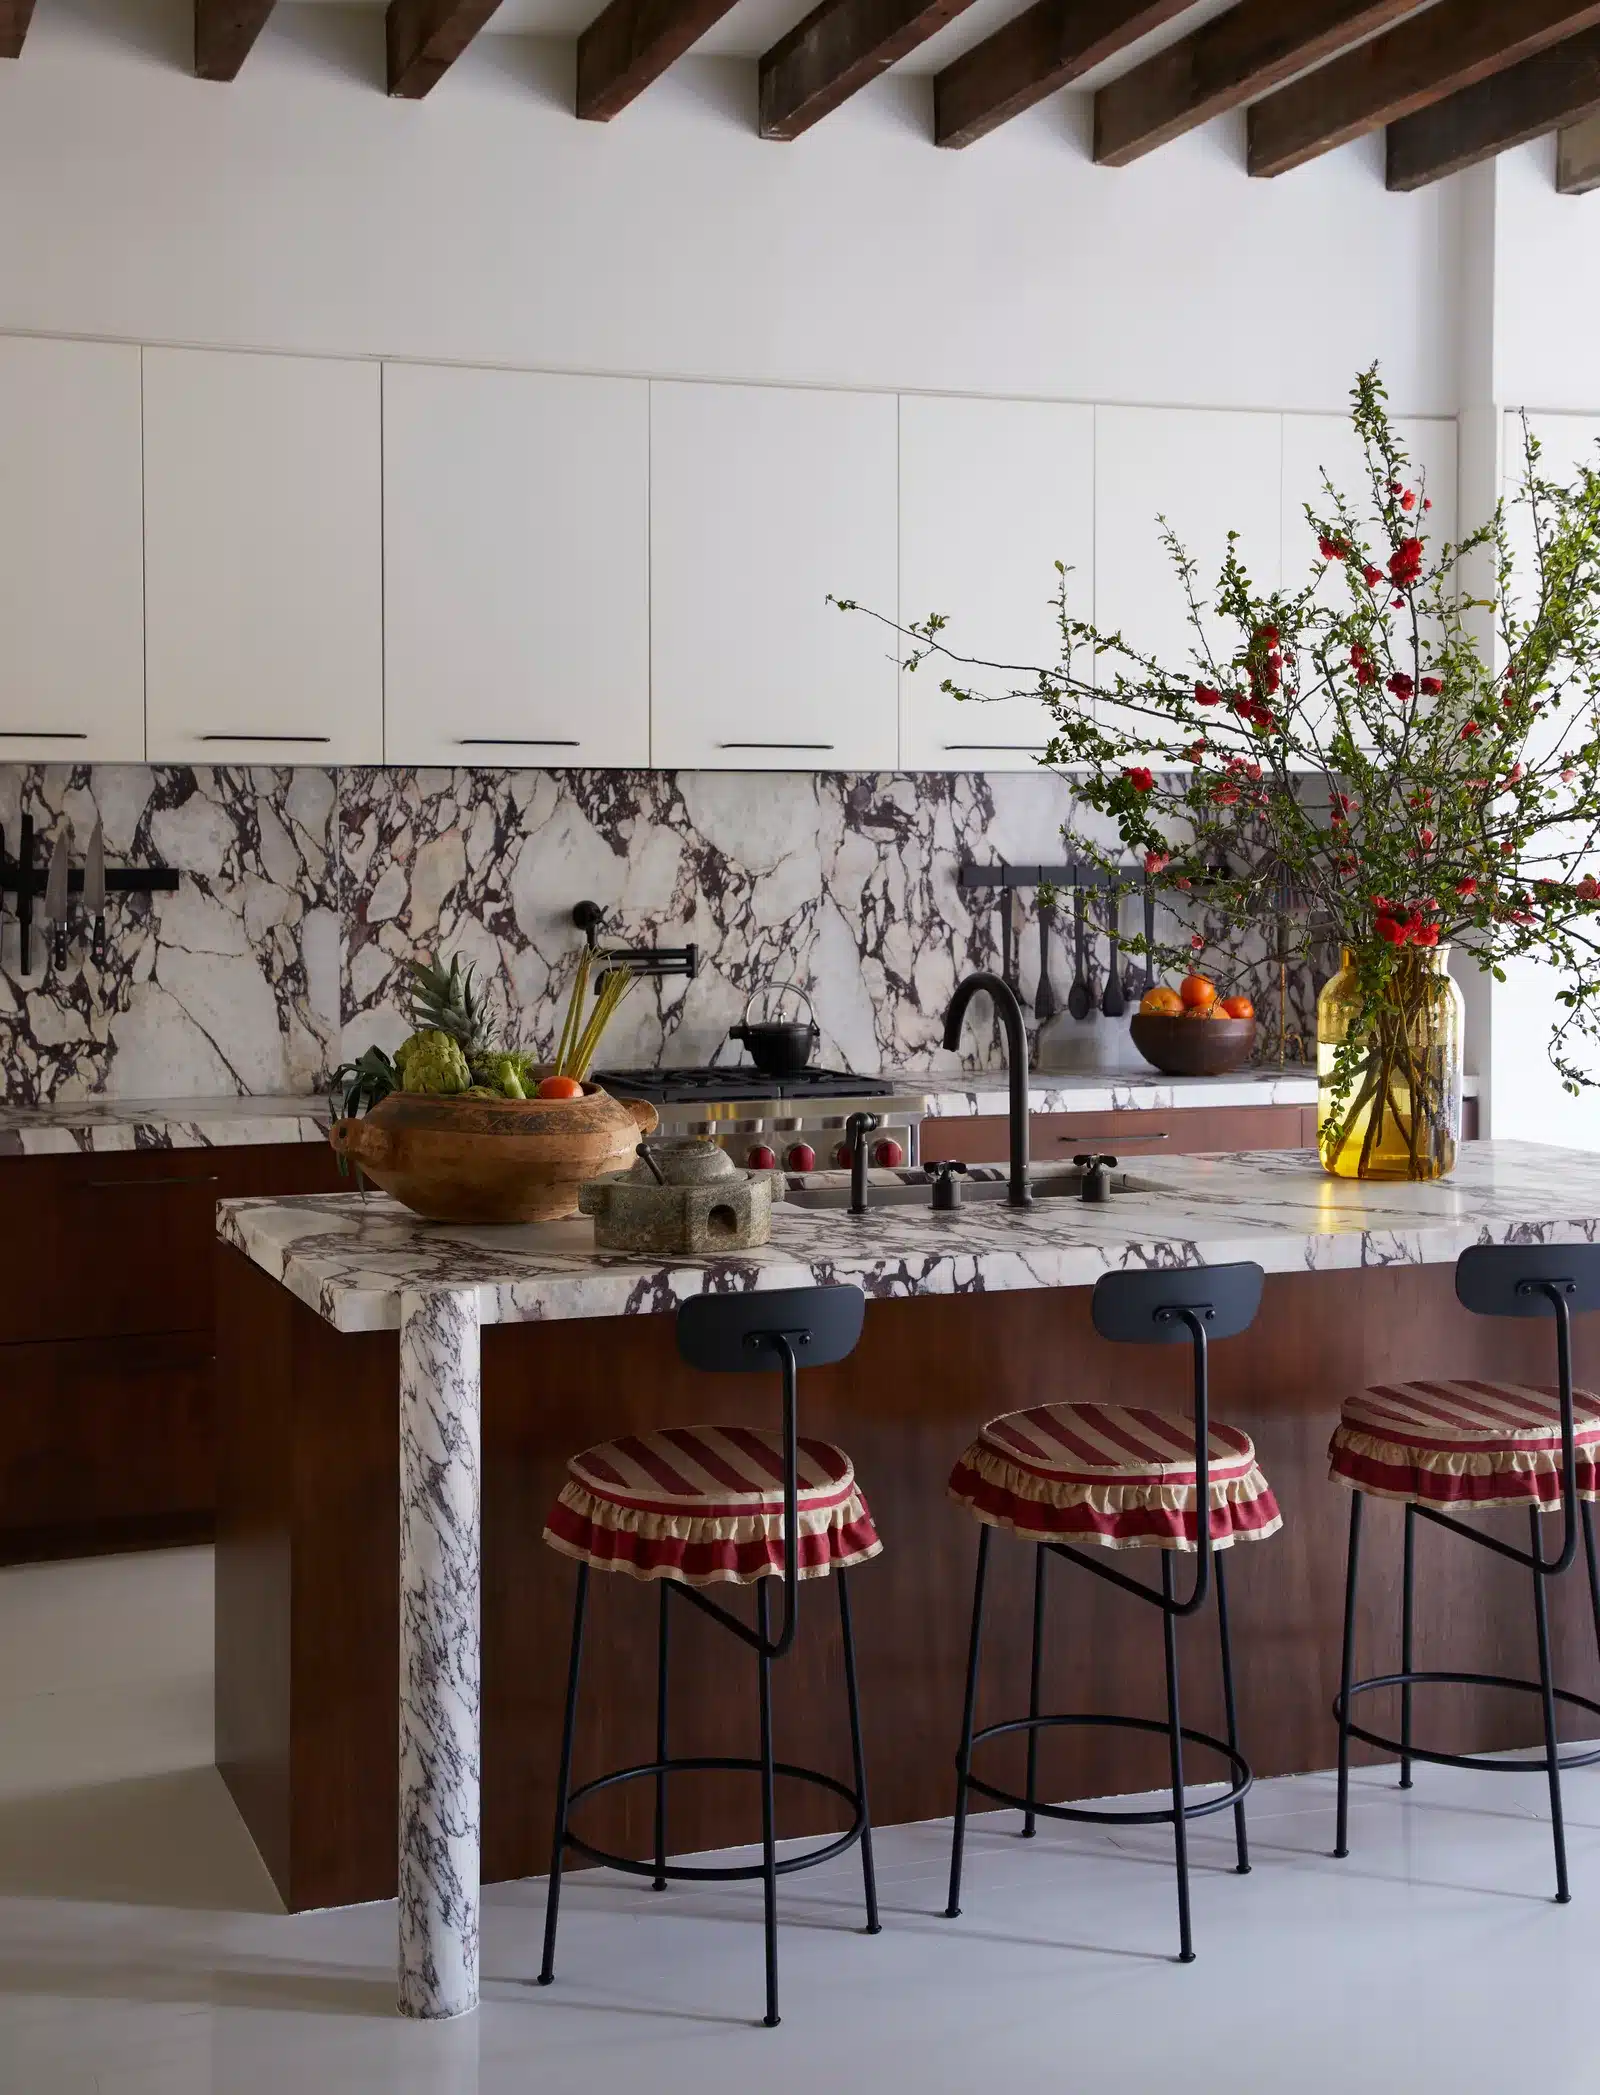 How Interior Designers Can Monetize for The Holidays